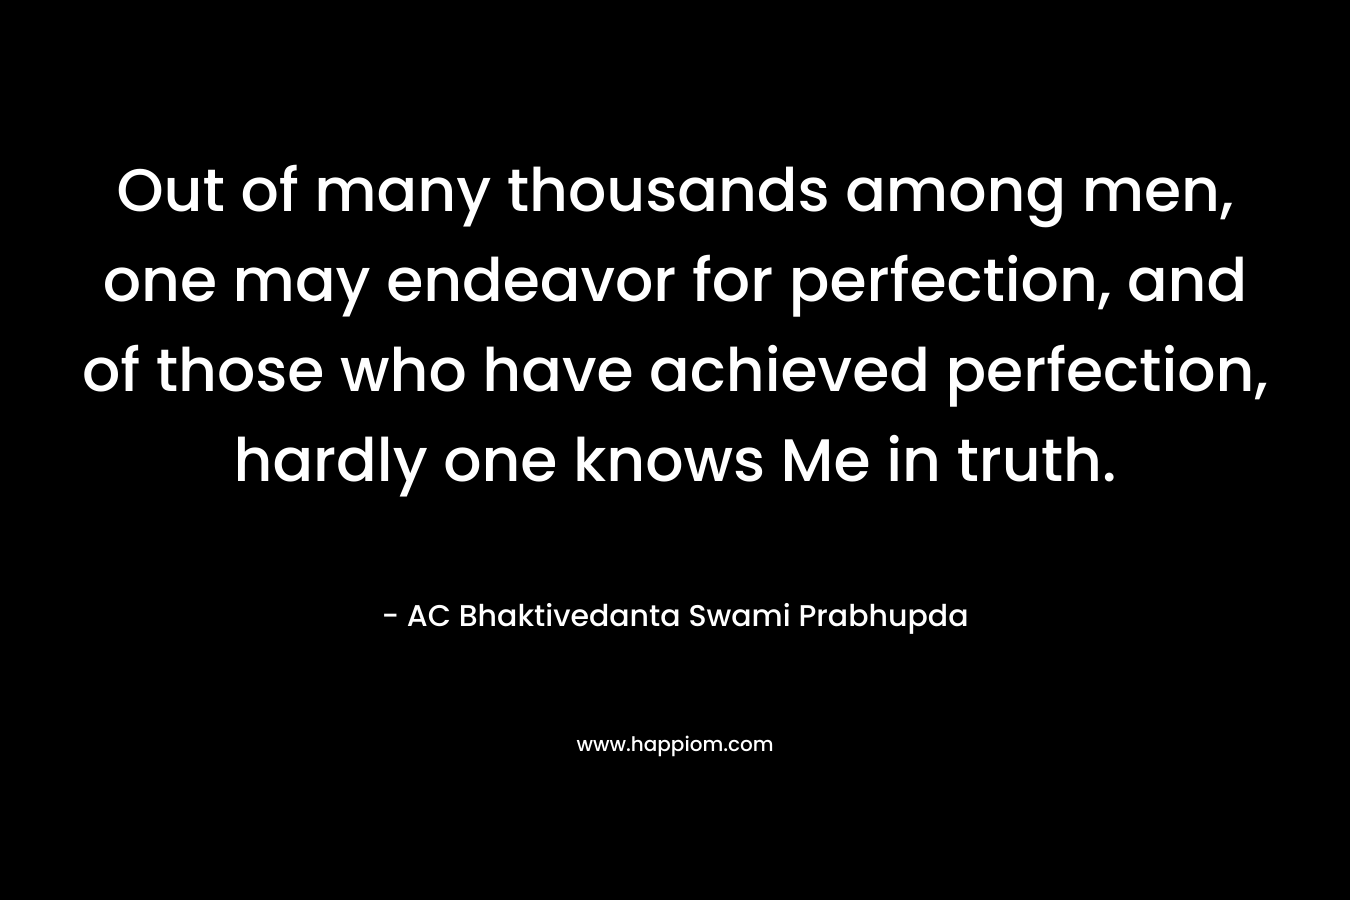 Out of many thousands among men, one may endeavor for perfection, and of those who have achieved perfection, hardly one knows Me in truth.